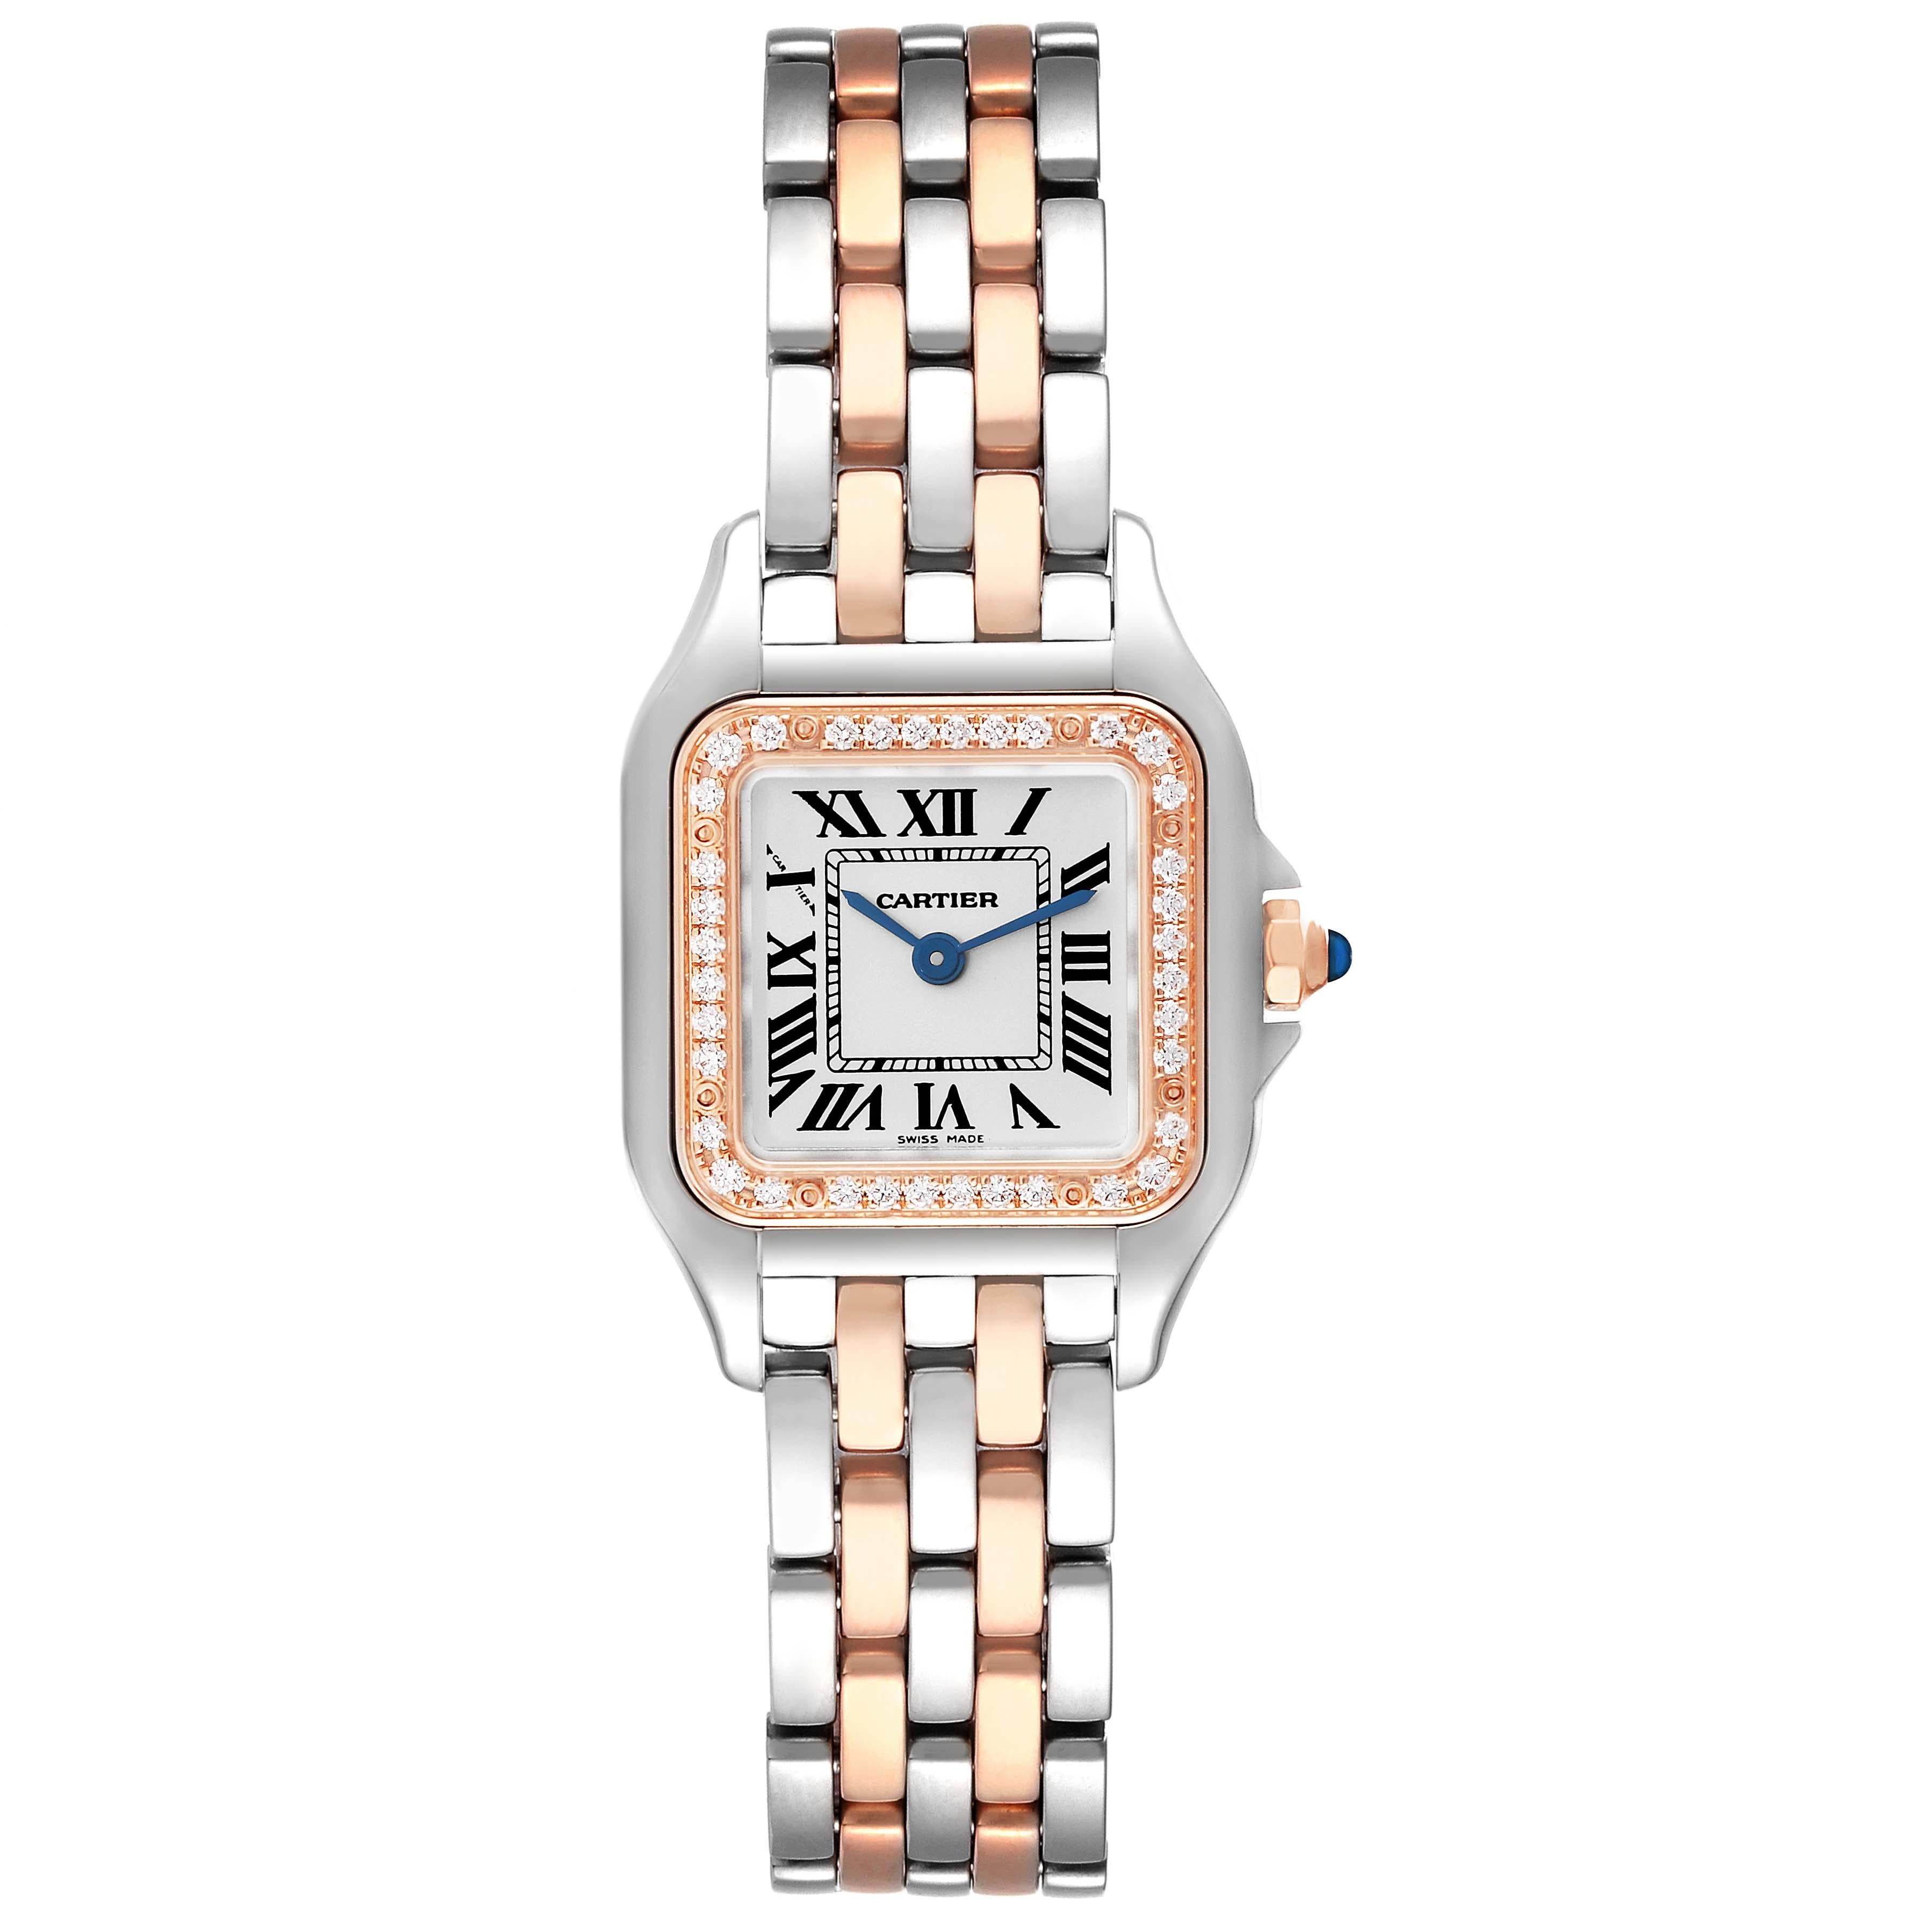 Cartier Panthere Small Steel Rose Gold Diamond Ladies Watch W3PN0006 Card. Quartz movement. Stainless steel and 18k rose gold case 22.0 x 30.0 mm. Octagonal 18k rose gold crown set with a blue spinel cabochon. 18k rose gold bezel set with original